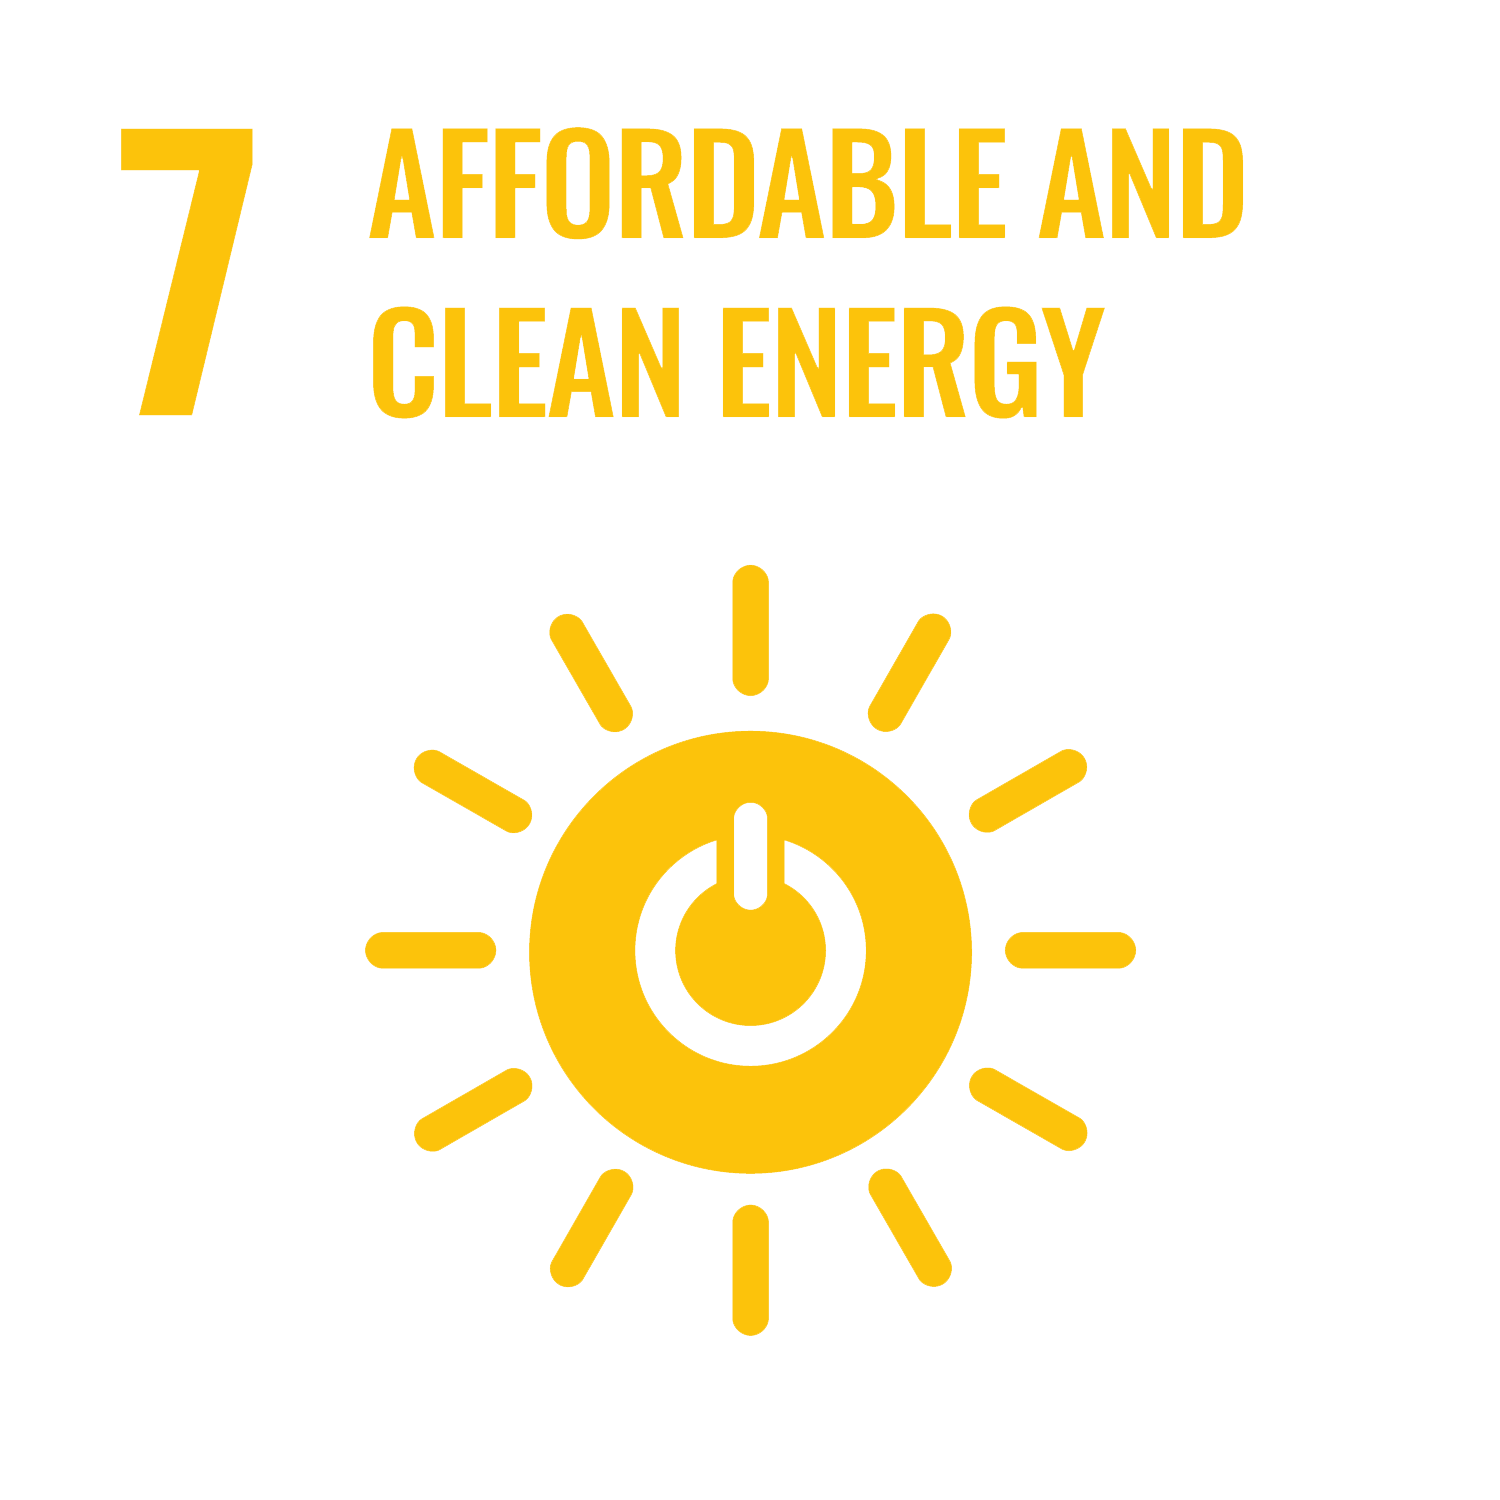 United Nations Goal #7 Affordable and Clean Energy